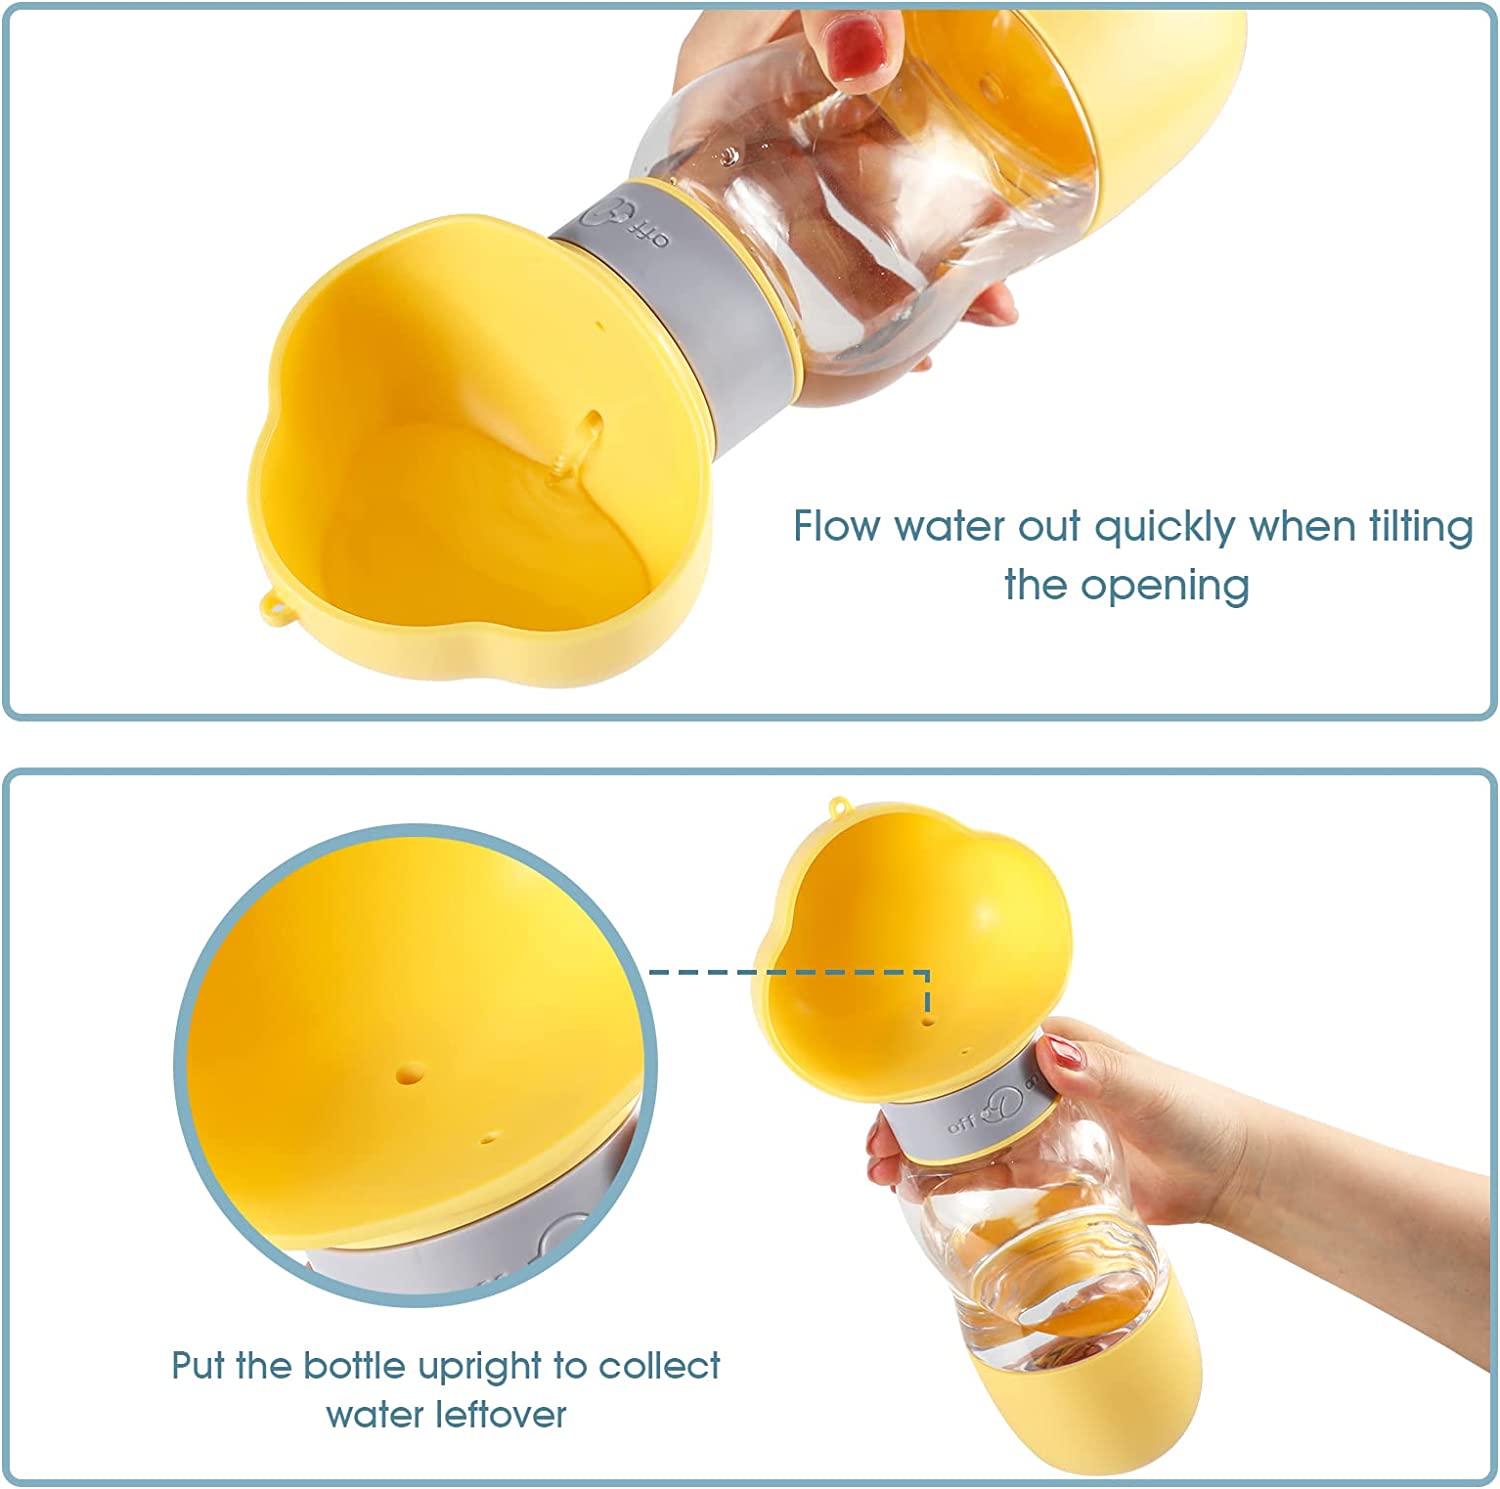 Portable Dog Water Bottle with Food Container Leak Proof Dog Water Dispenser(Yellow)